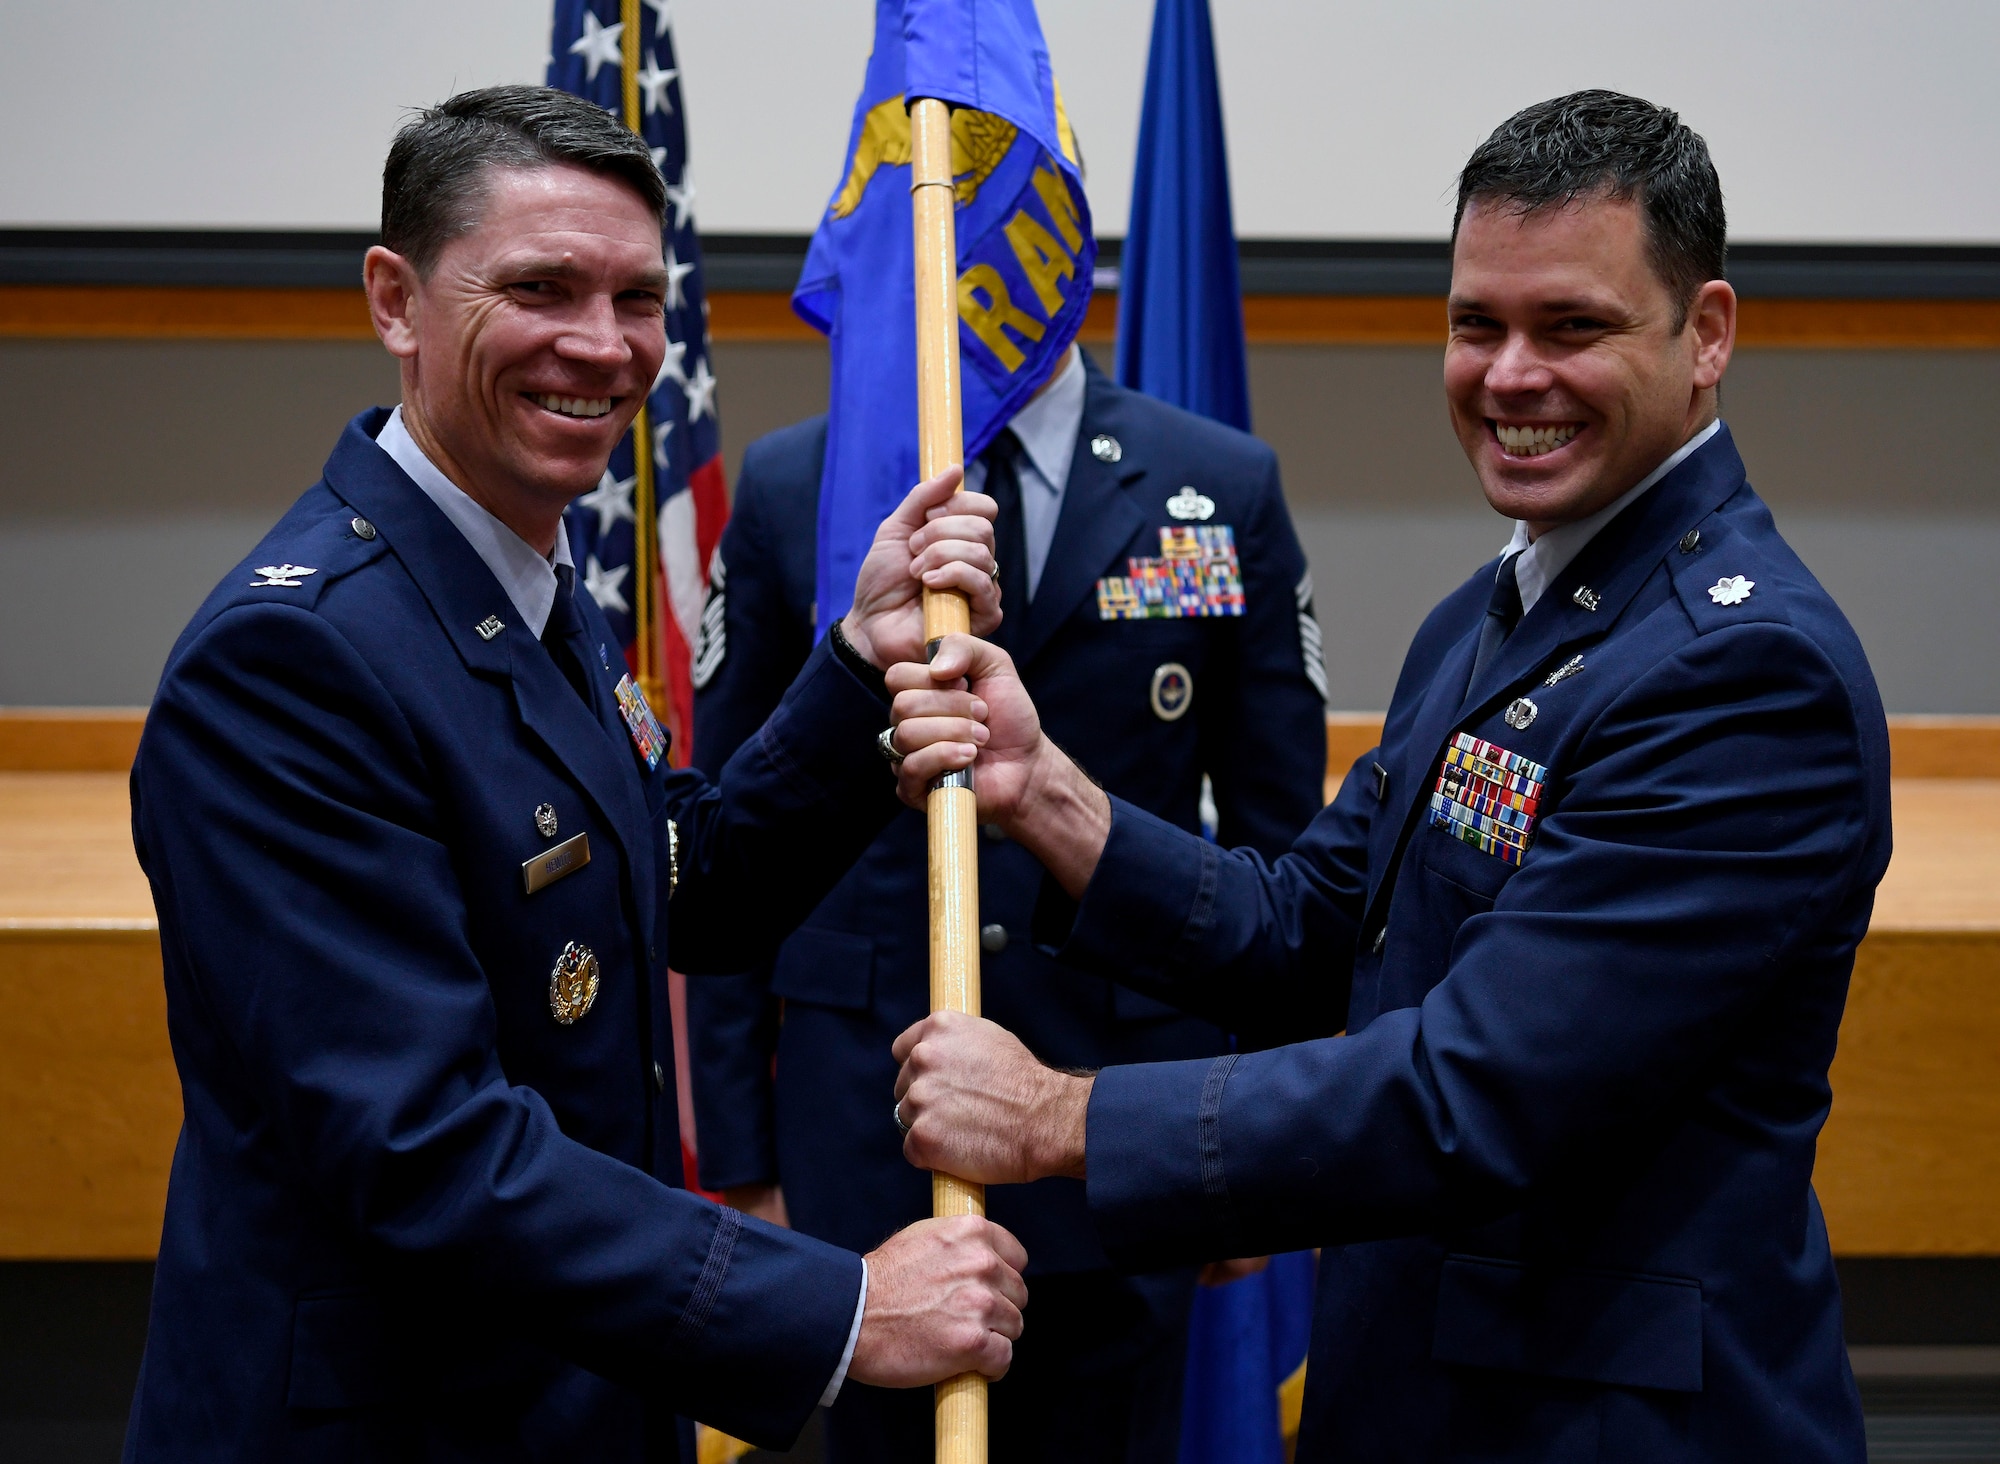 Lt. Col. Peter Francik (right) accepts the guidon and command of the 318th Range Squadron from Col. James Hewitt, 318th Cyberspace Operations Group commander, during the squadron’s activation ceremony at Joint Base San Antonio-Lackland, Texas, Oct. 1, 2019. The then-614th Radar Squadron was previously inactivated Aug. 1, 1963, at Cherry Point Marine Corps Air Station, N.C. (U.S. Air Force photo by Tech. Sgt. R.J. Biermann)